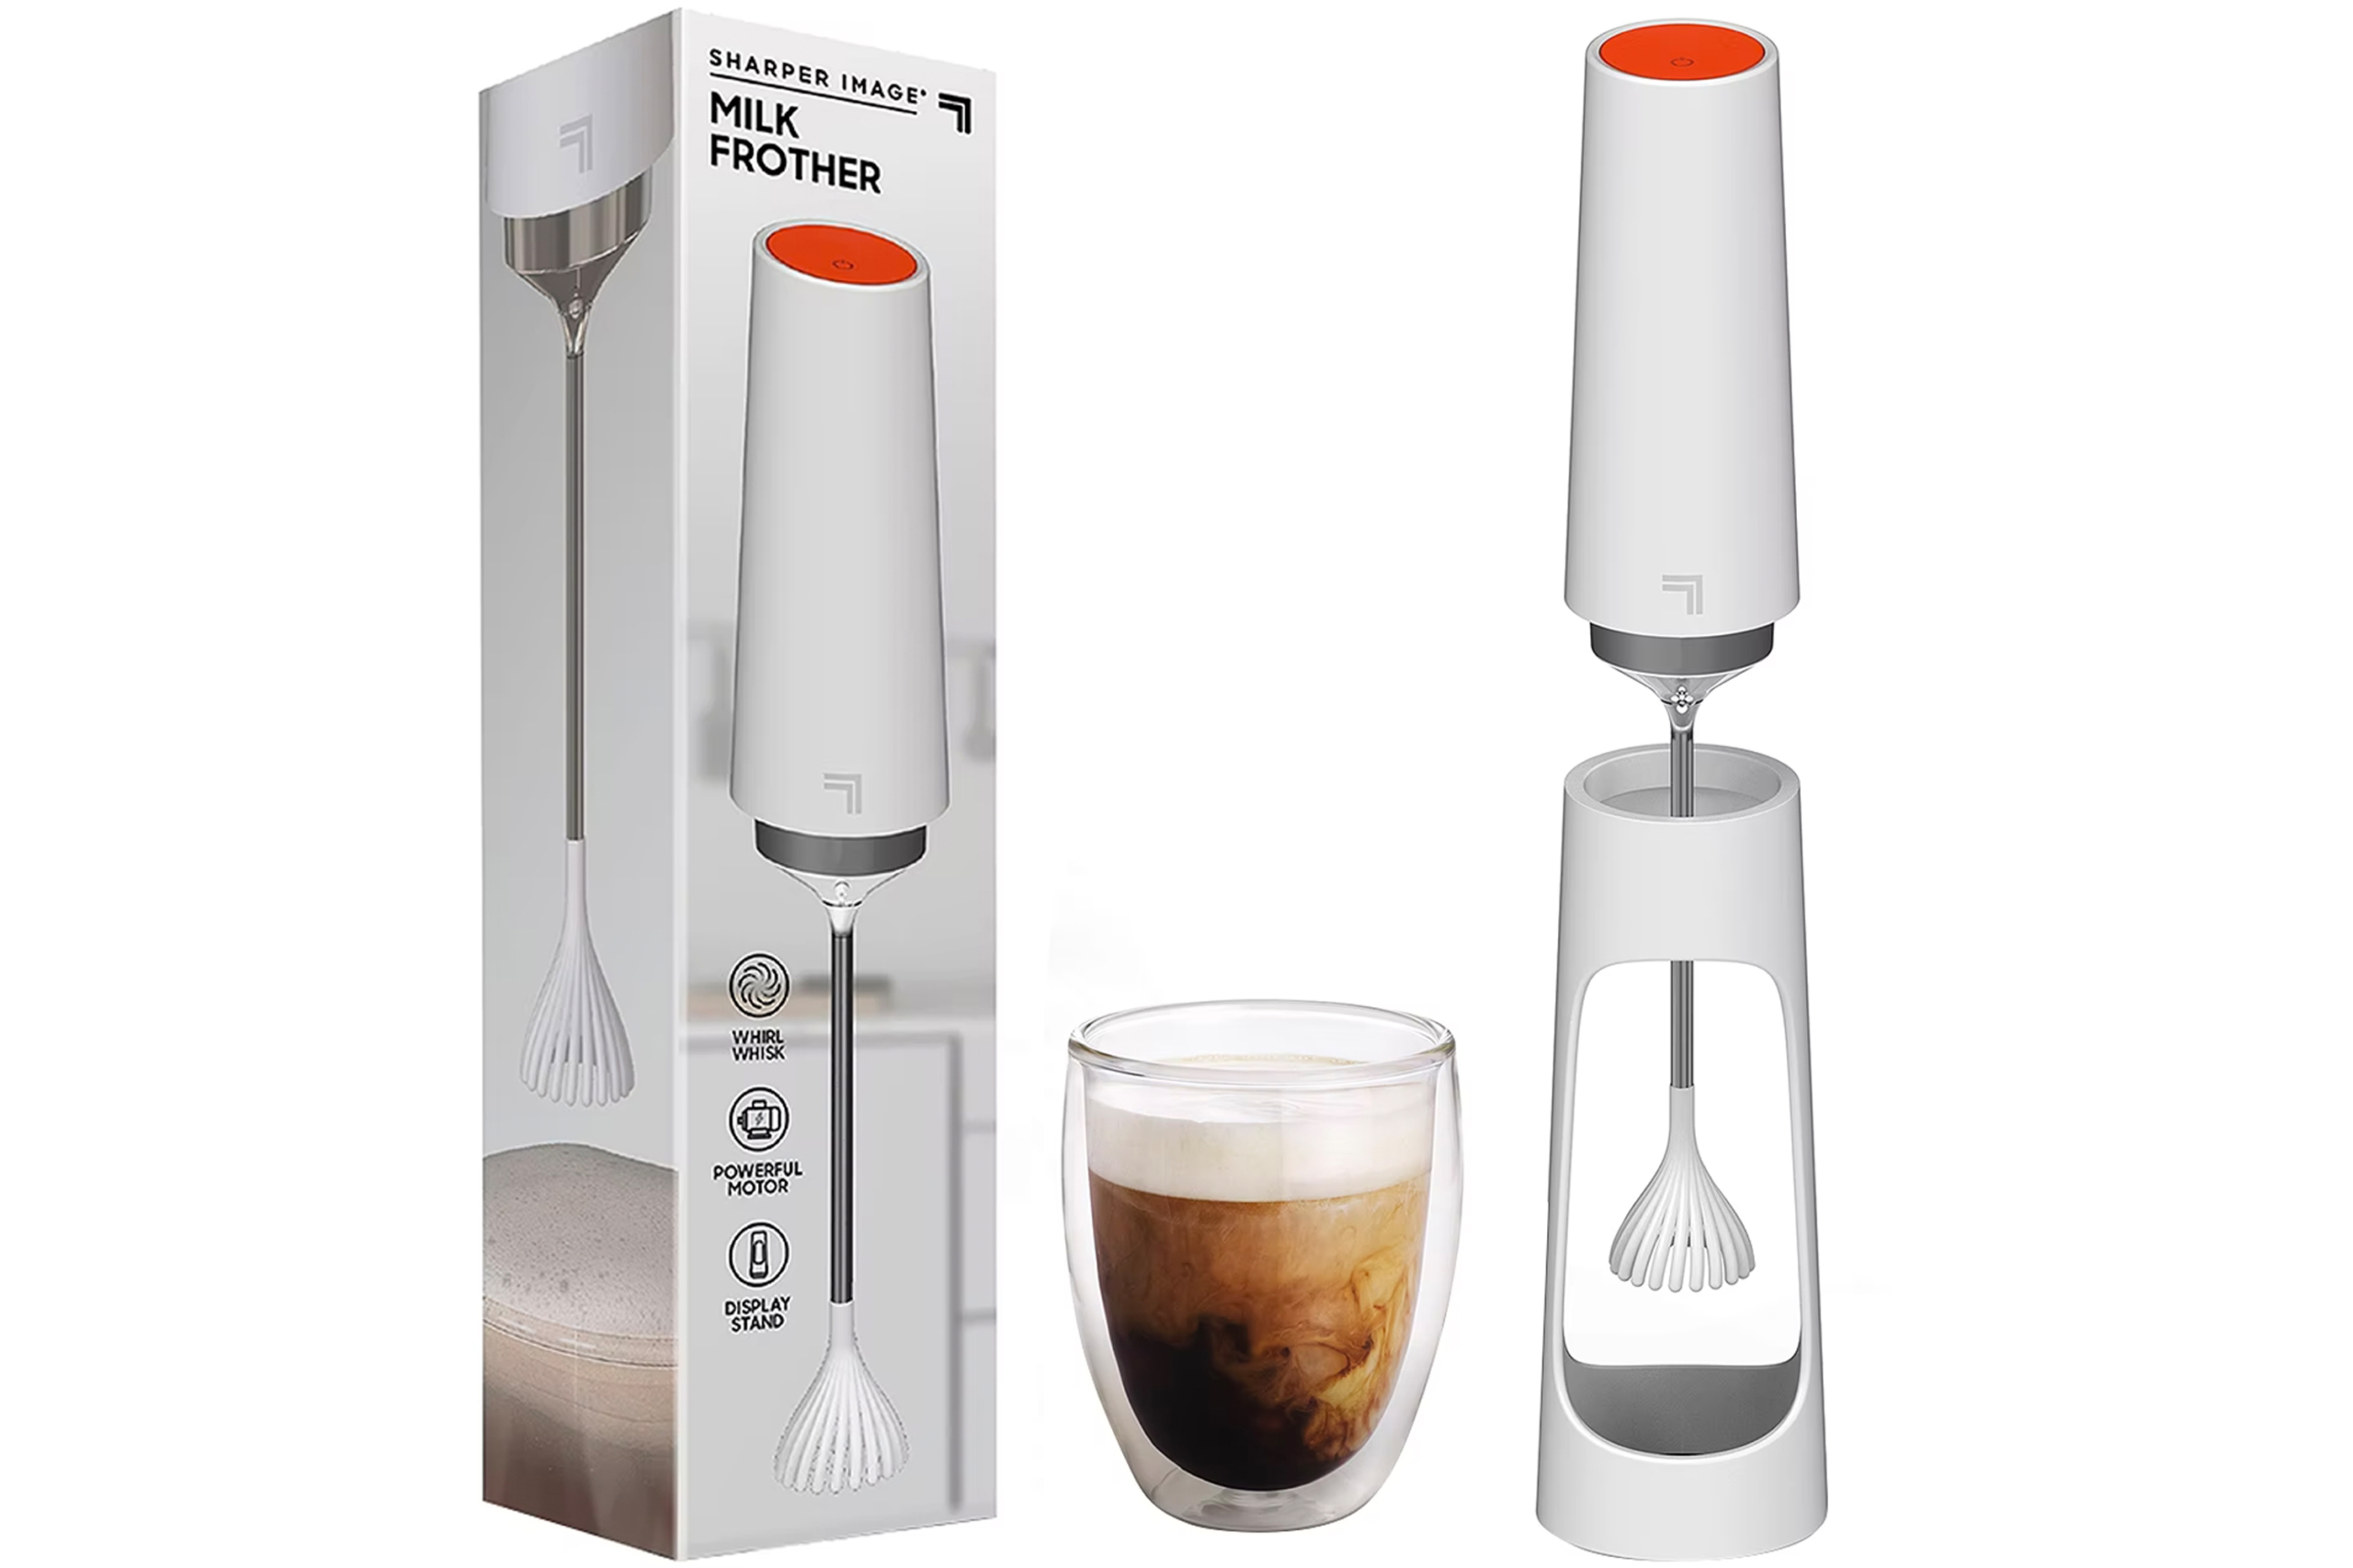 https://thekrazycouponlady.com/wp-content/uploads/2022/12/best-unisex-gifts-gender-neutral-sharper-image-milk-frother-jcpenney-1671028709-1671028709-scaled.jpg